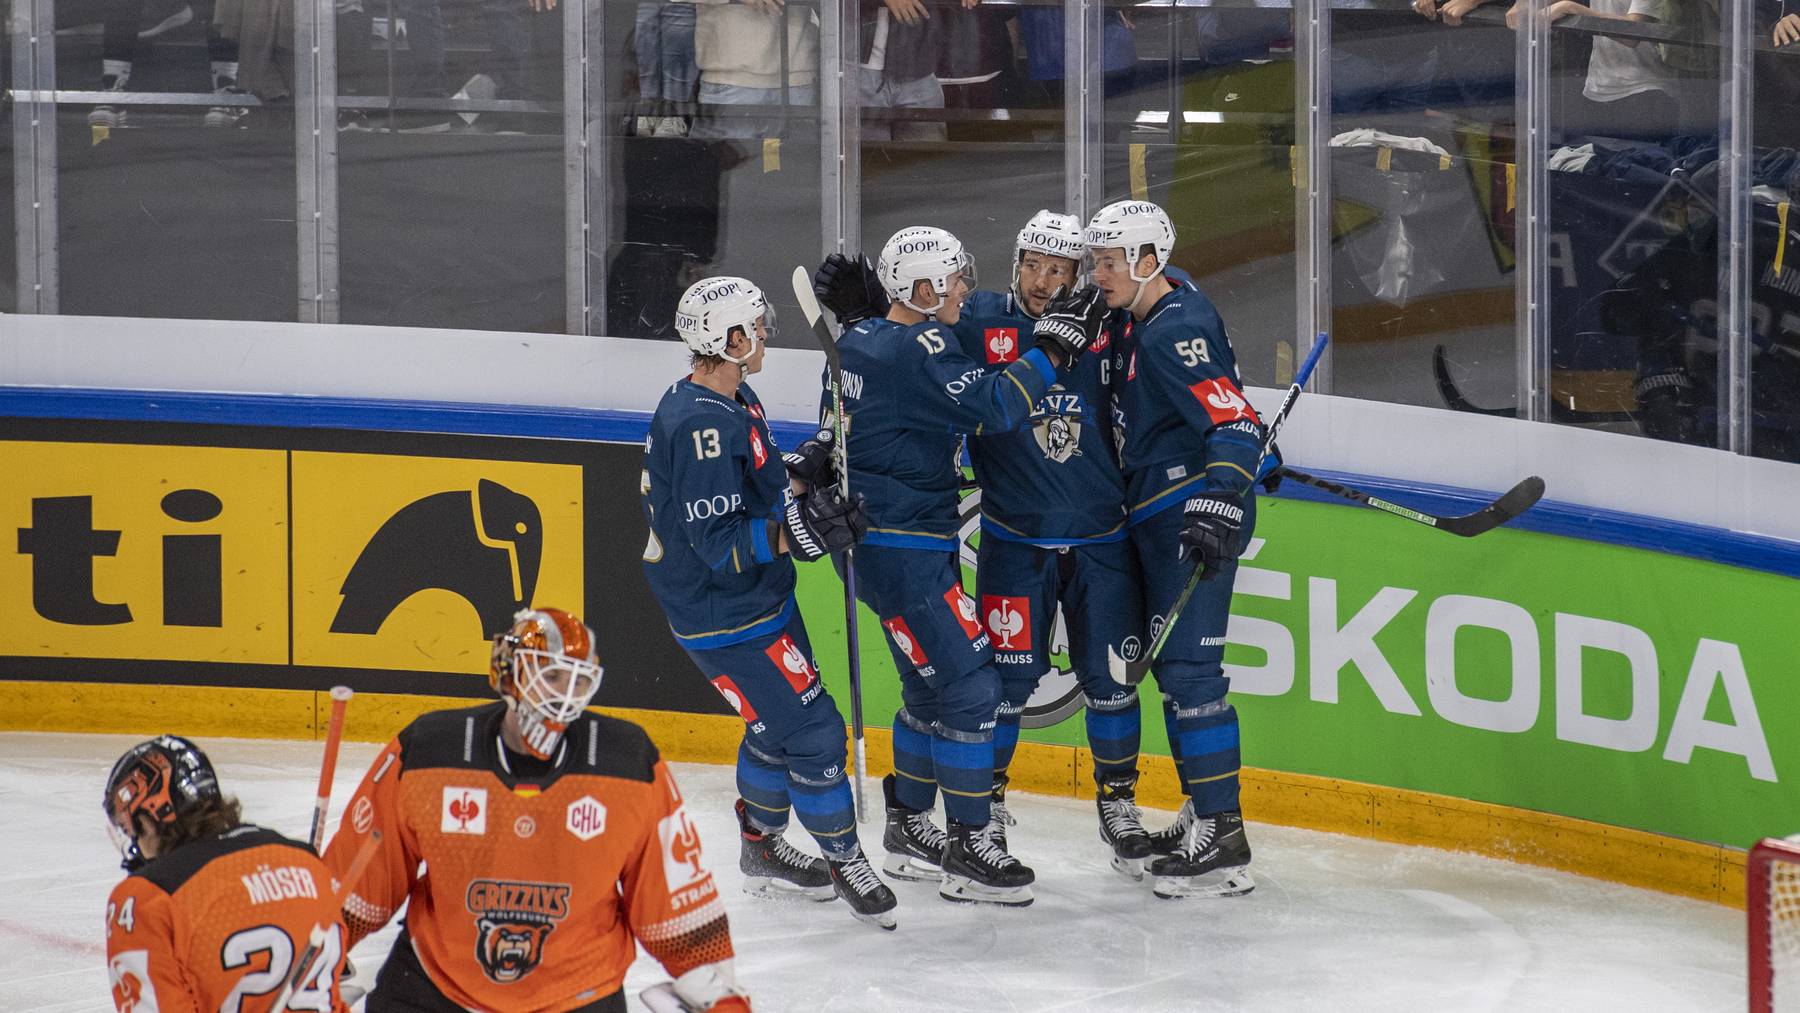 The Players from Zug with Dario Wuethrich, Gregory Hofmann, Samuel Kreis and Dario Simion, from left, reacts after the 1:0 goal during the Champions Hockey League group B match between Switzerland's EV Zug and Grizzlys Wolfsburg of Germany, in Zug, Switzerland, Saturday, September 8, 2022.